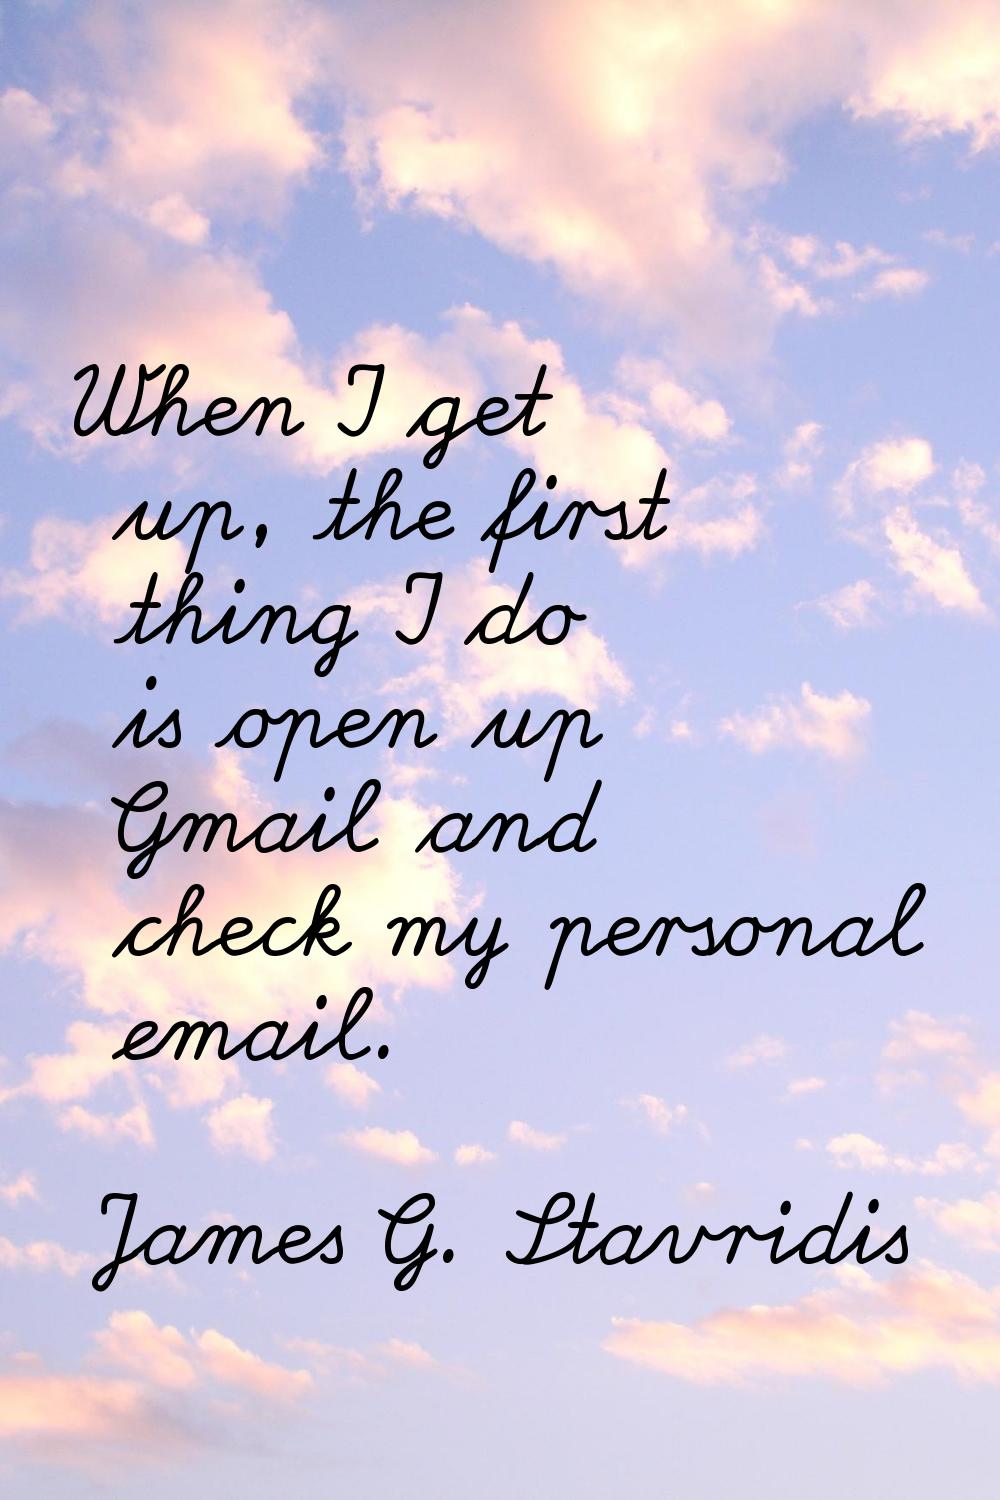 When I get up, the first thing I do is open up Gmail and check my personal email.